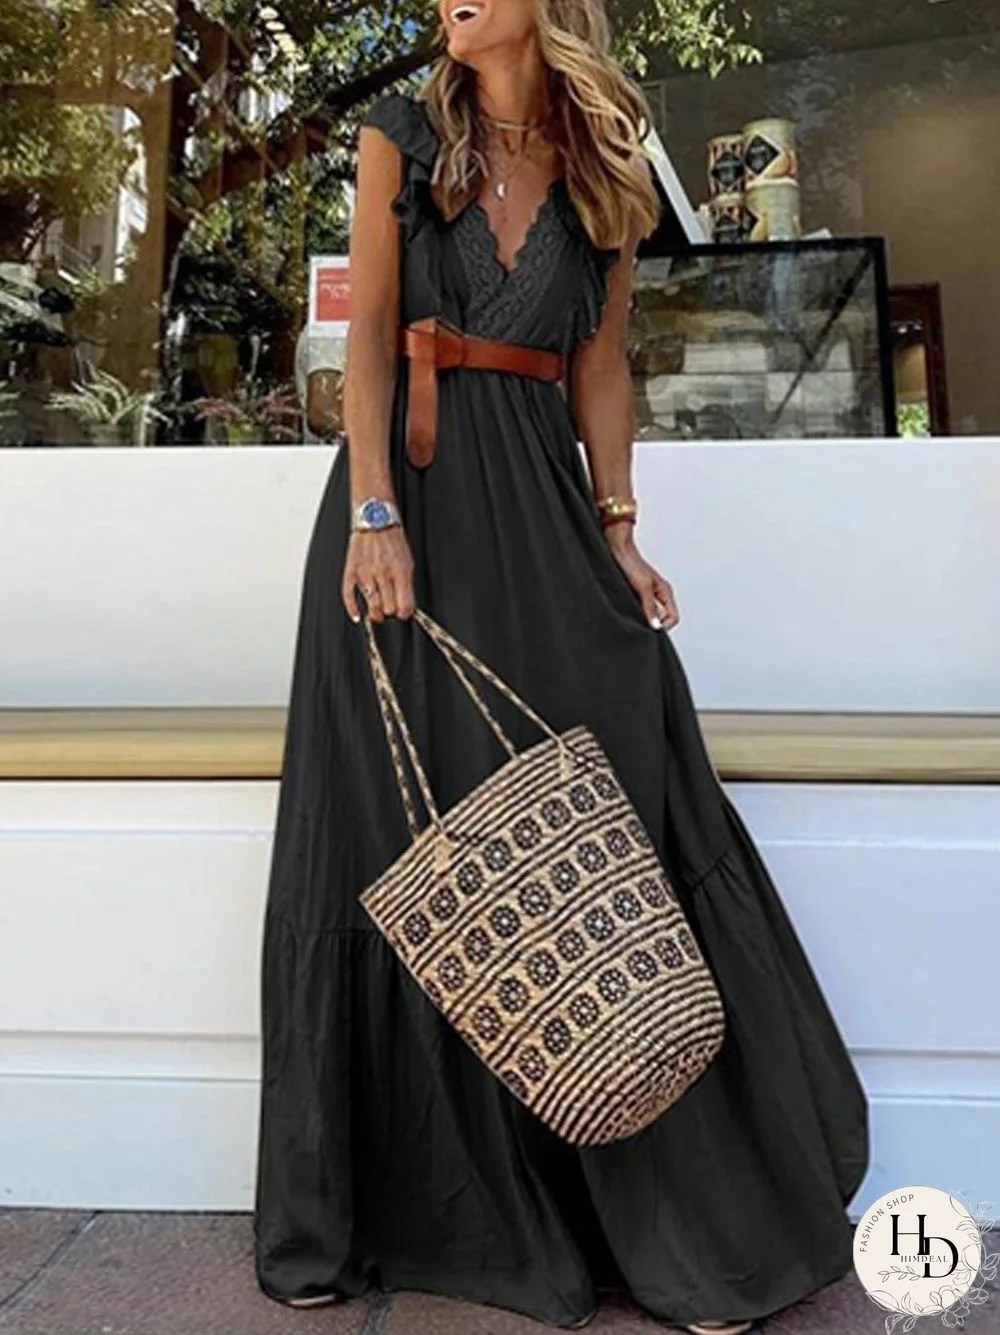 Summer Sexy Sleeveless Deep V Lace Patchwork Dress Ladies Elegant Solid Waist A-Line Dress Women Fashion Pleated Loose Dresses